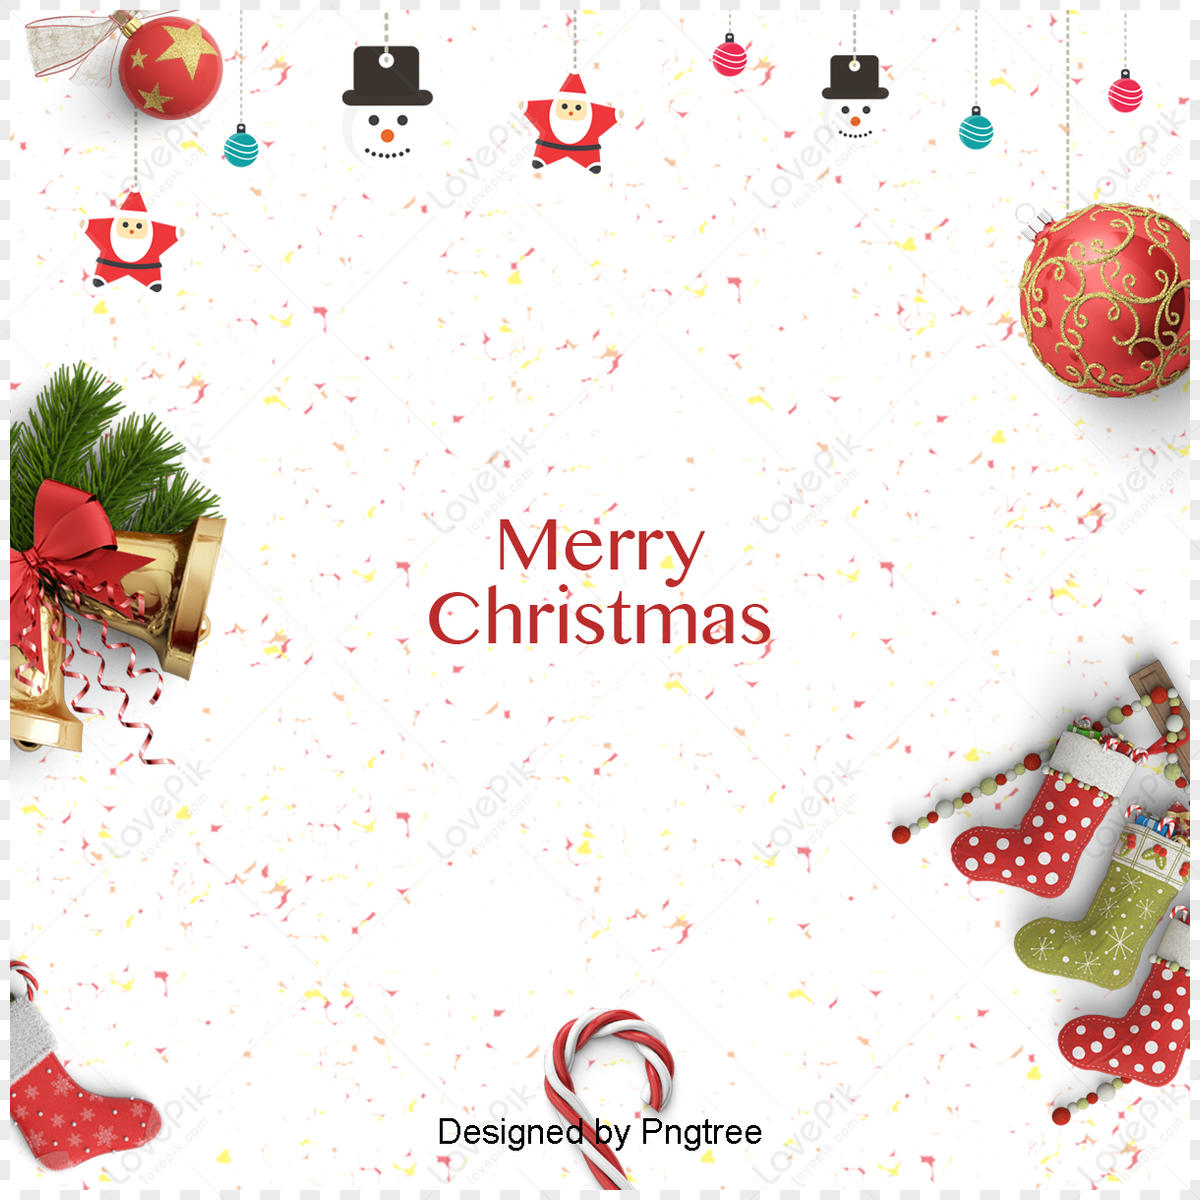 Exquisite and colourful red physical Christmas background,tree,vintage png image